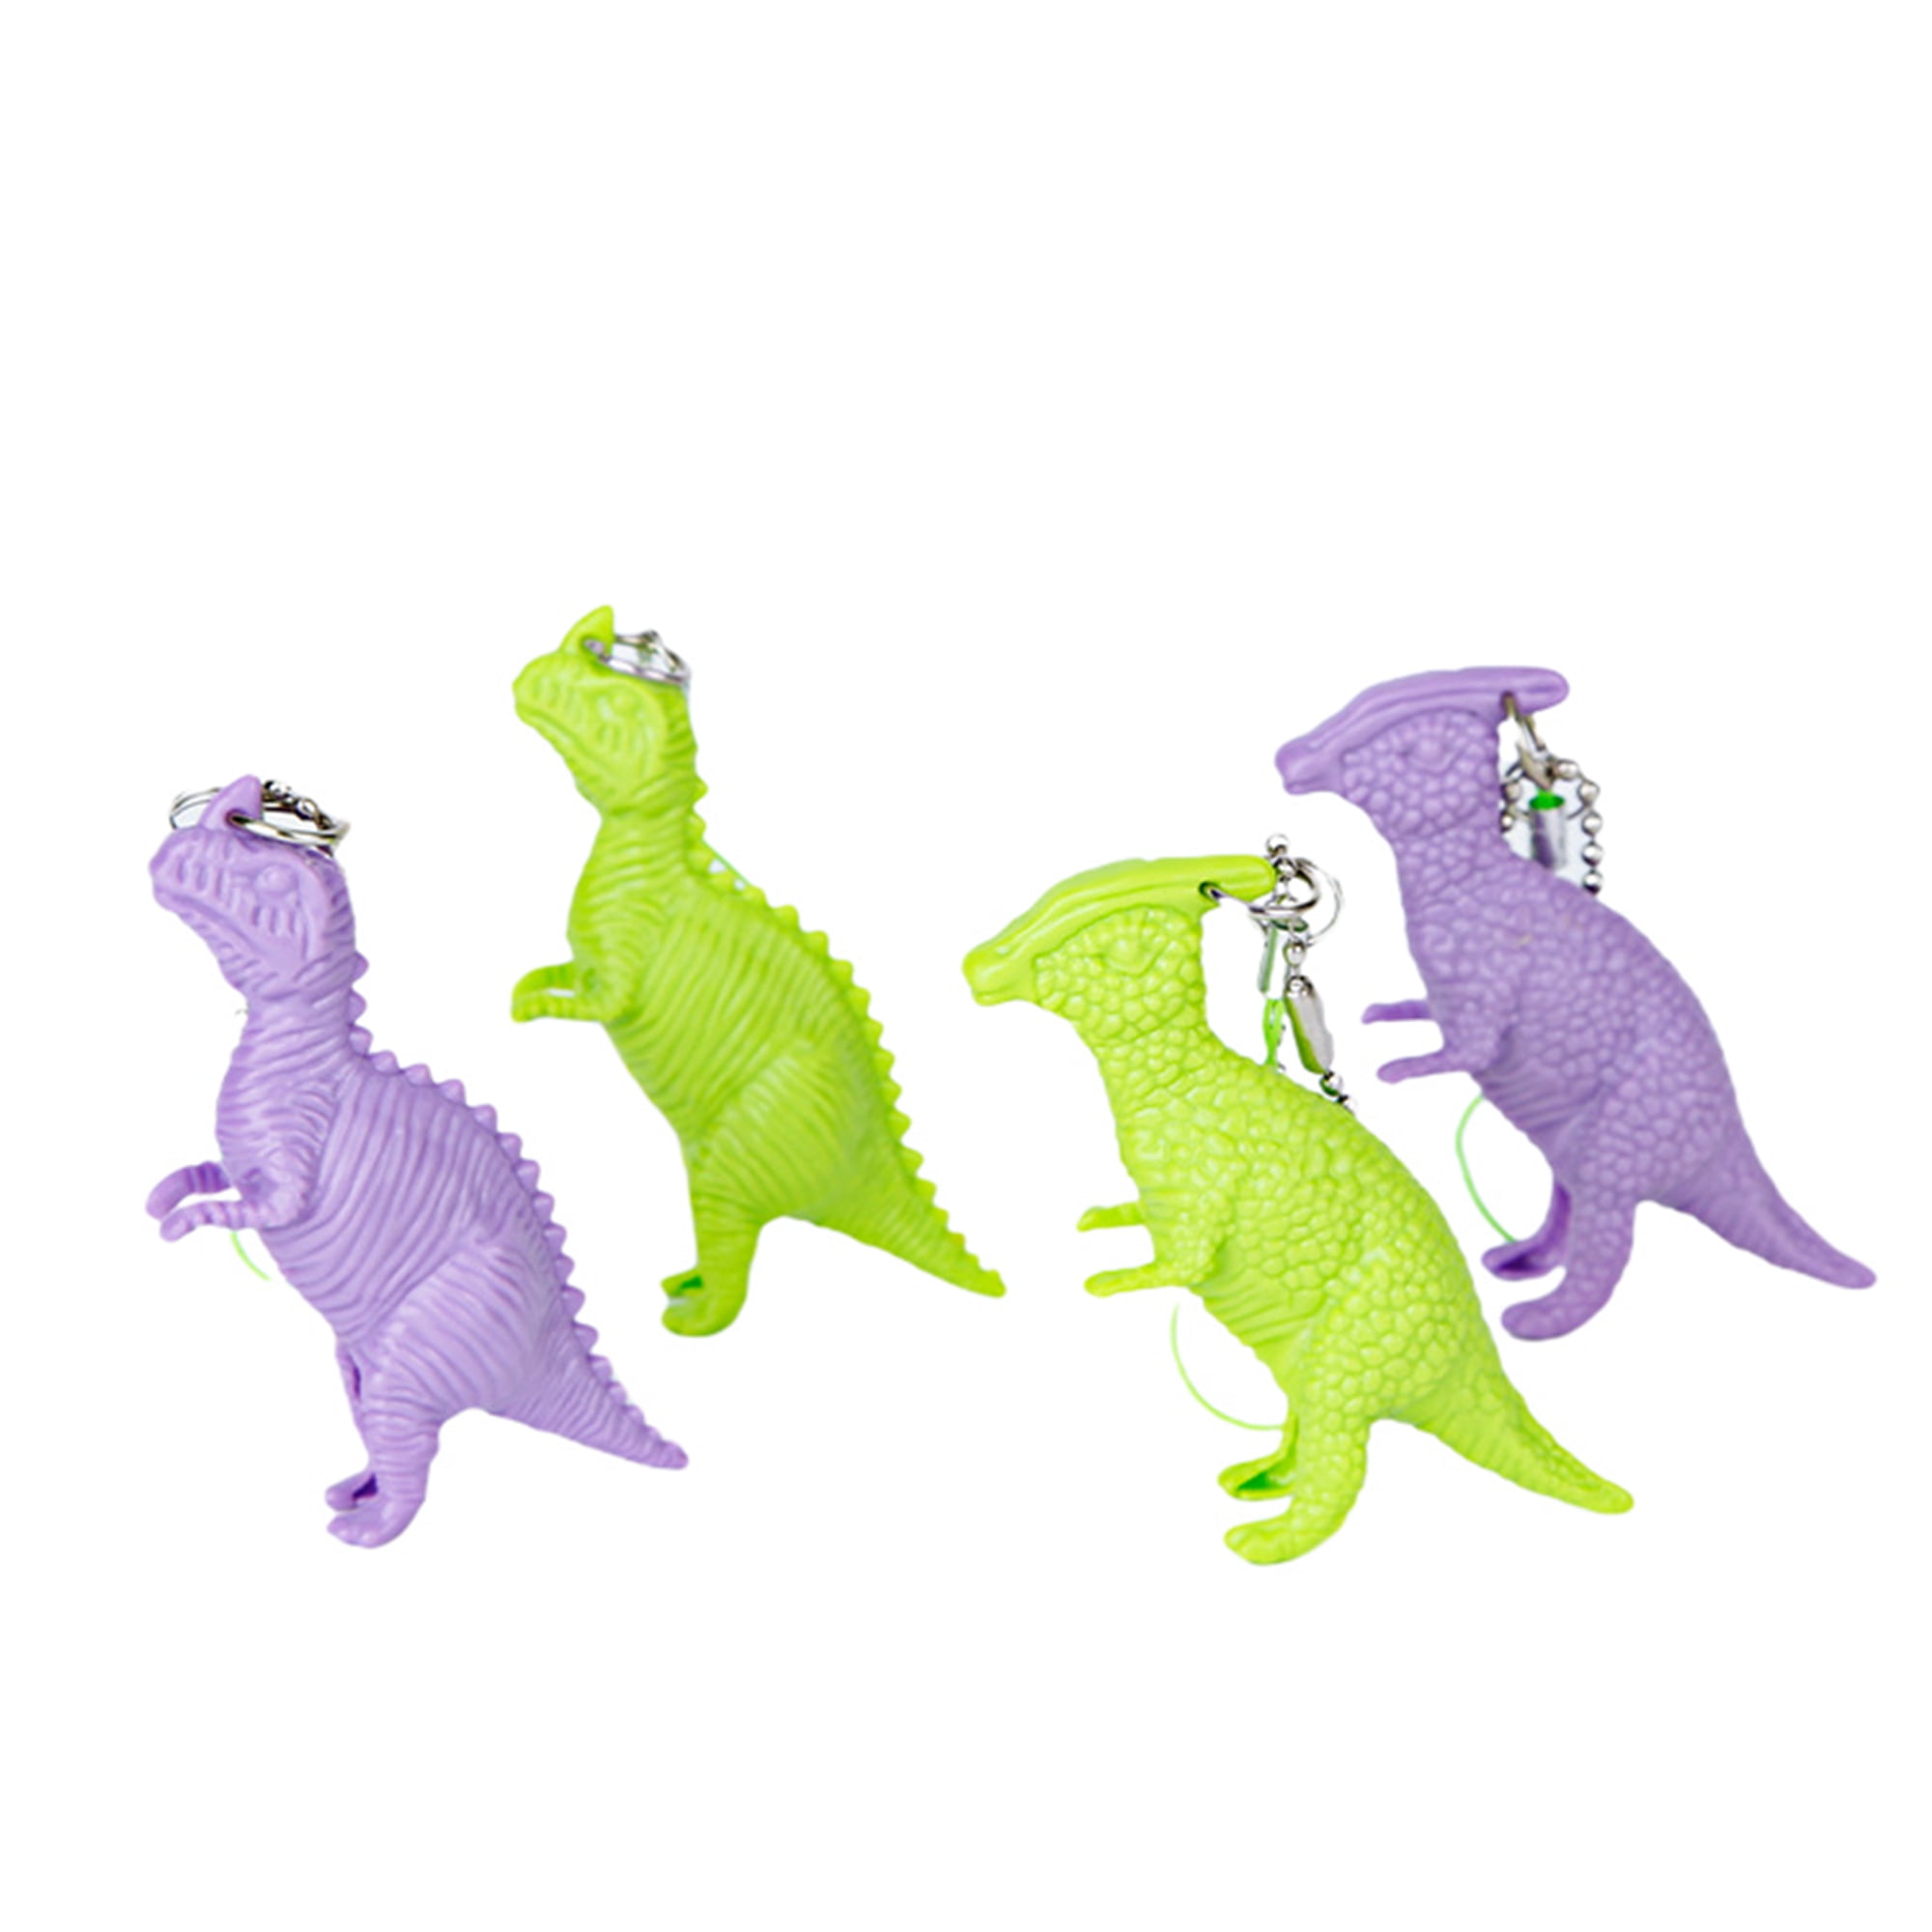 SV14667 KEY CHAIN STRESS RELIEF DINO SQUEEZEY TOY Details about   DINOSAUR SQUEEZE POO KEYRING 